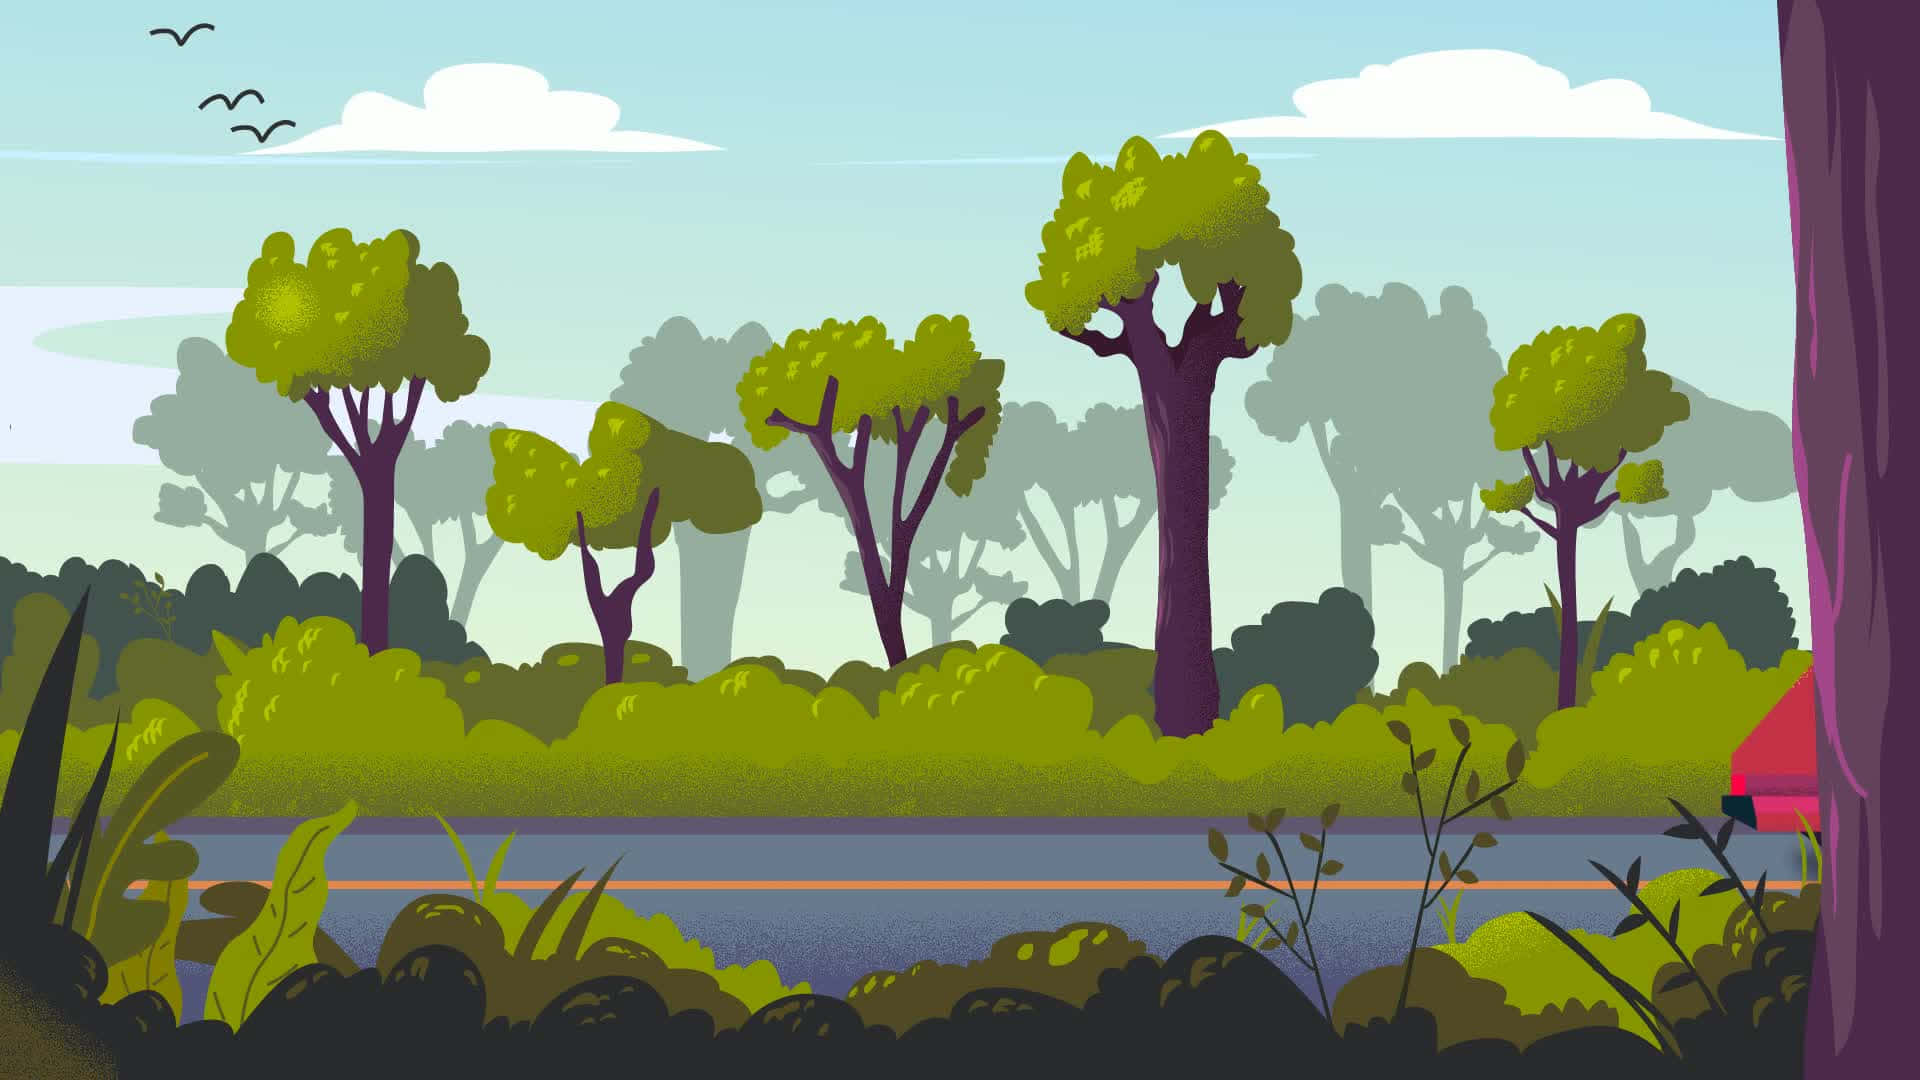 Explore the lush beauty of an animated forest